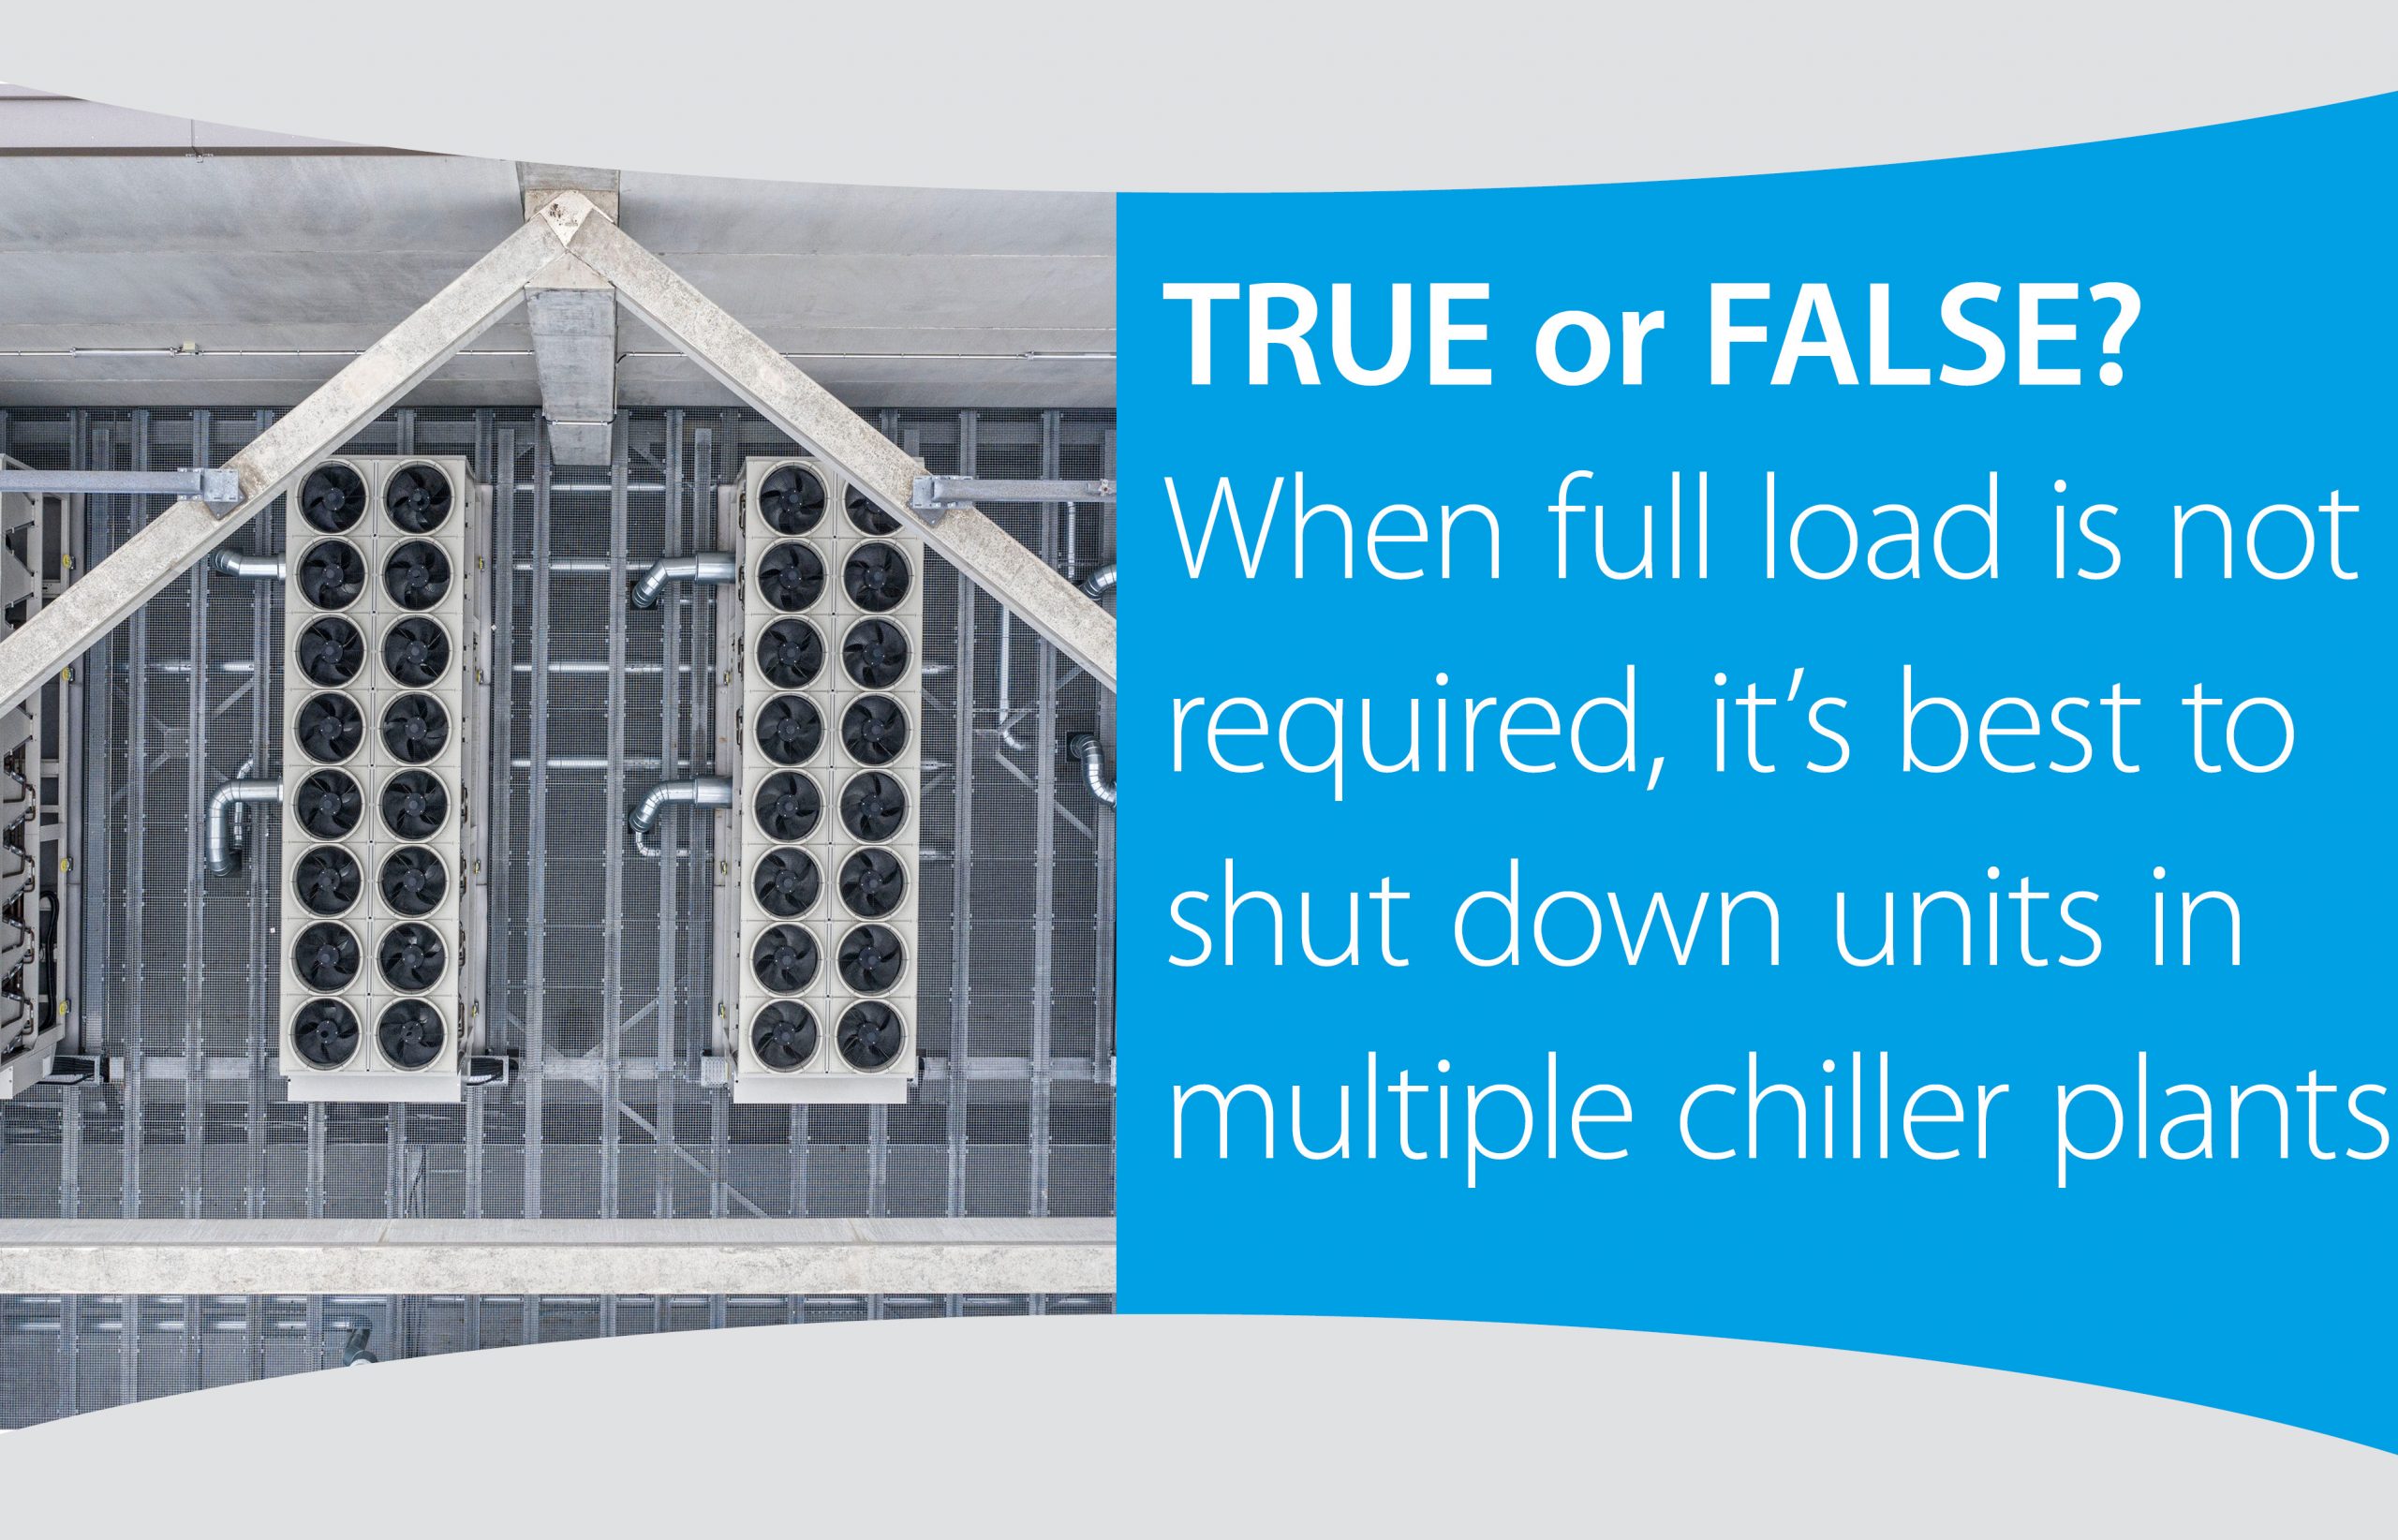 TRUE or FALSE? When full load is not required, it’s best to shut down units in multiple chiller plants